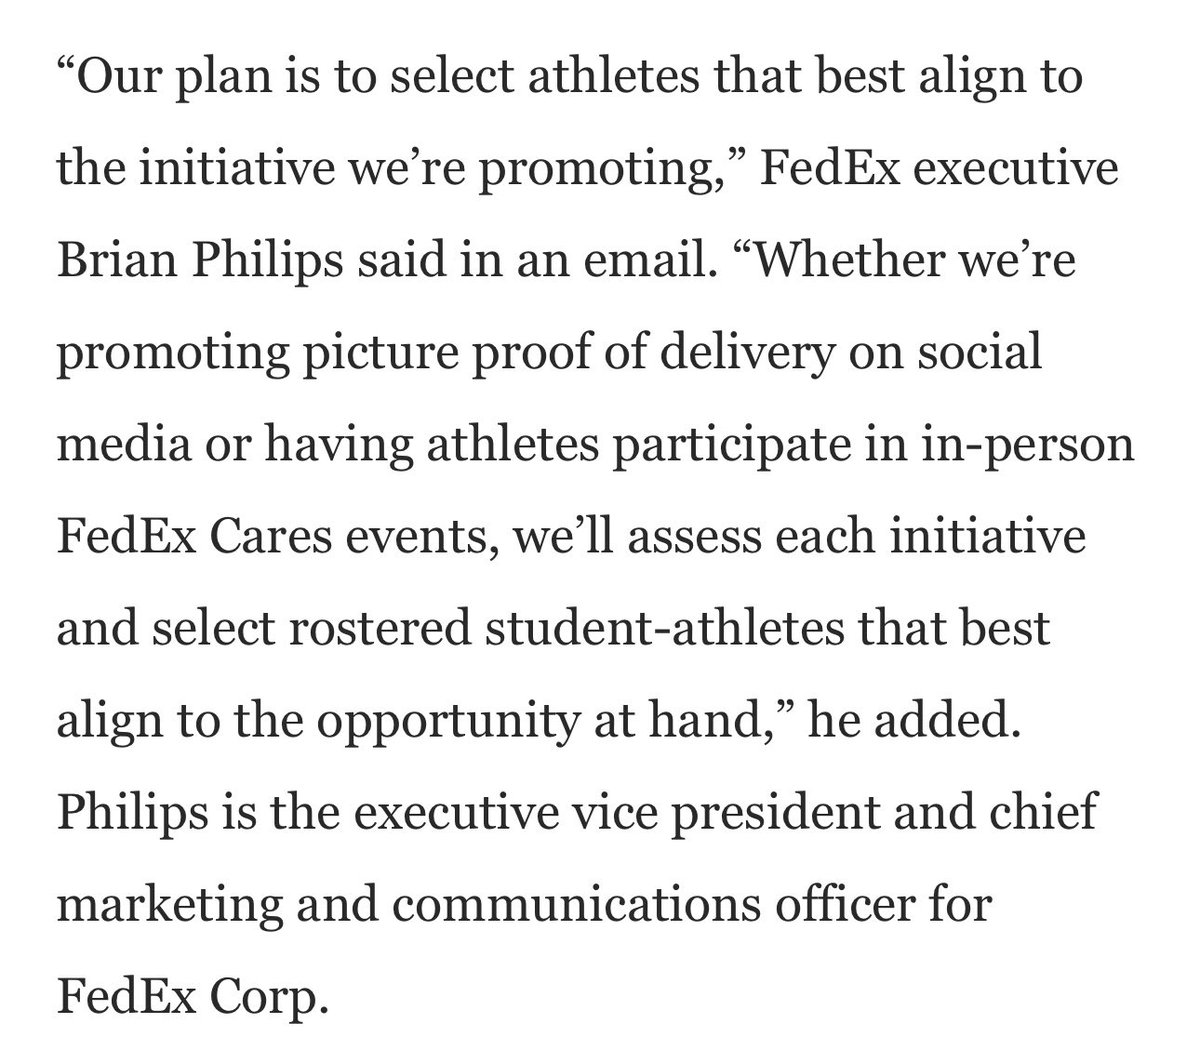 Big news for Memphis’ #NIL efforts. FedEx will spend $5M per year over 5 years on NIL deals with Memphis athletes.